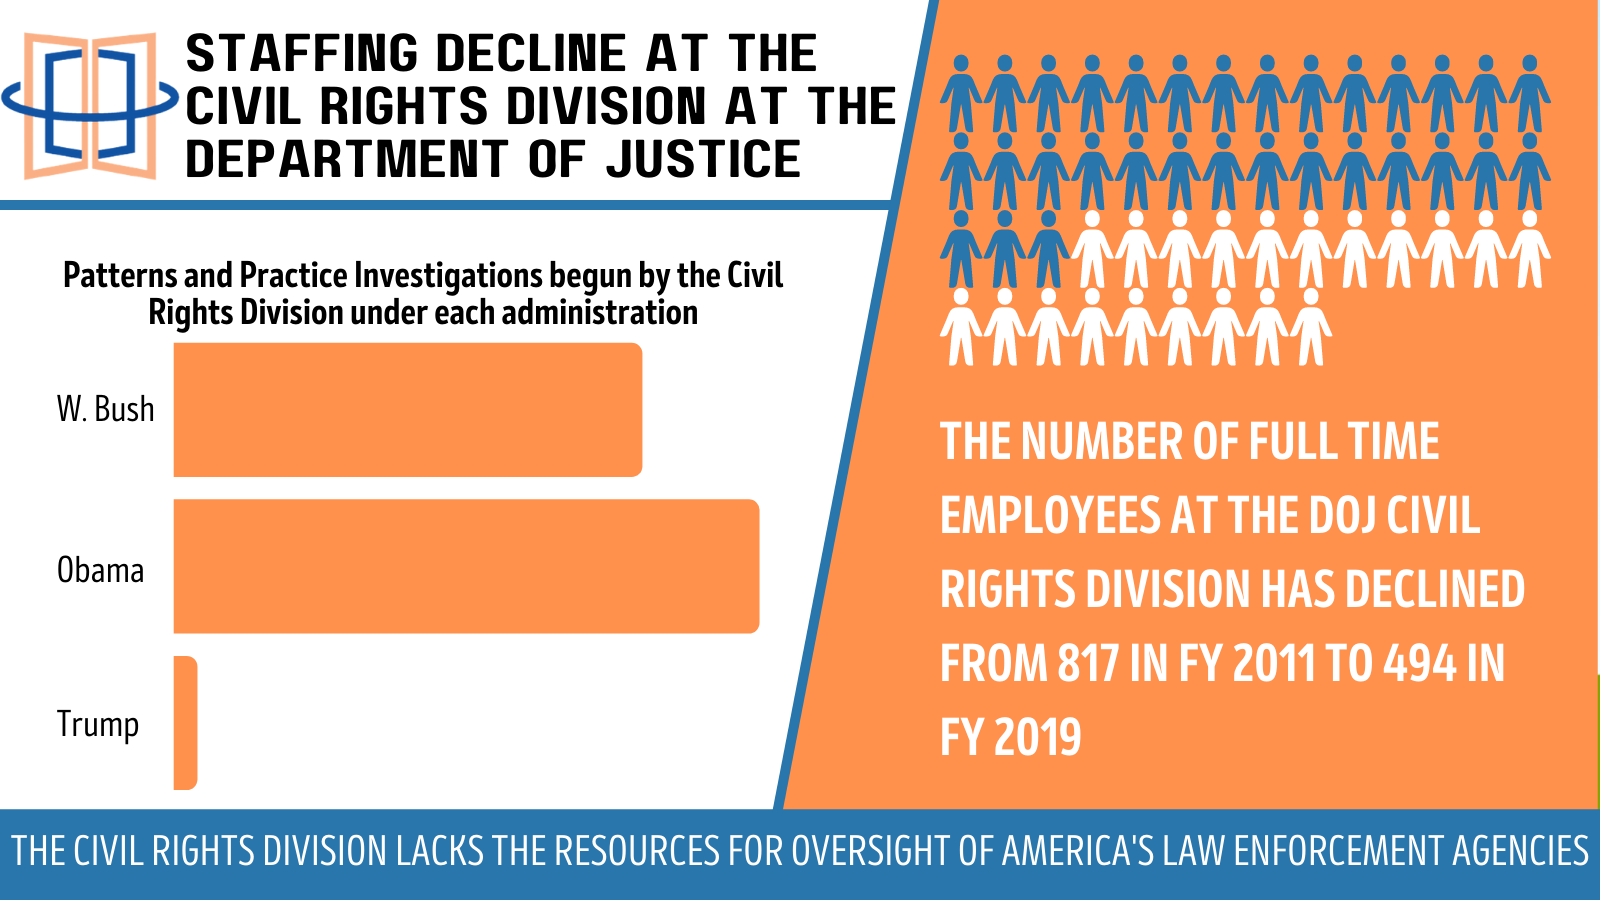 The DOJ's Civil Rights Division is Perilously Unstaffed, Slowing Biden Goals on Police Oversight and Reform